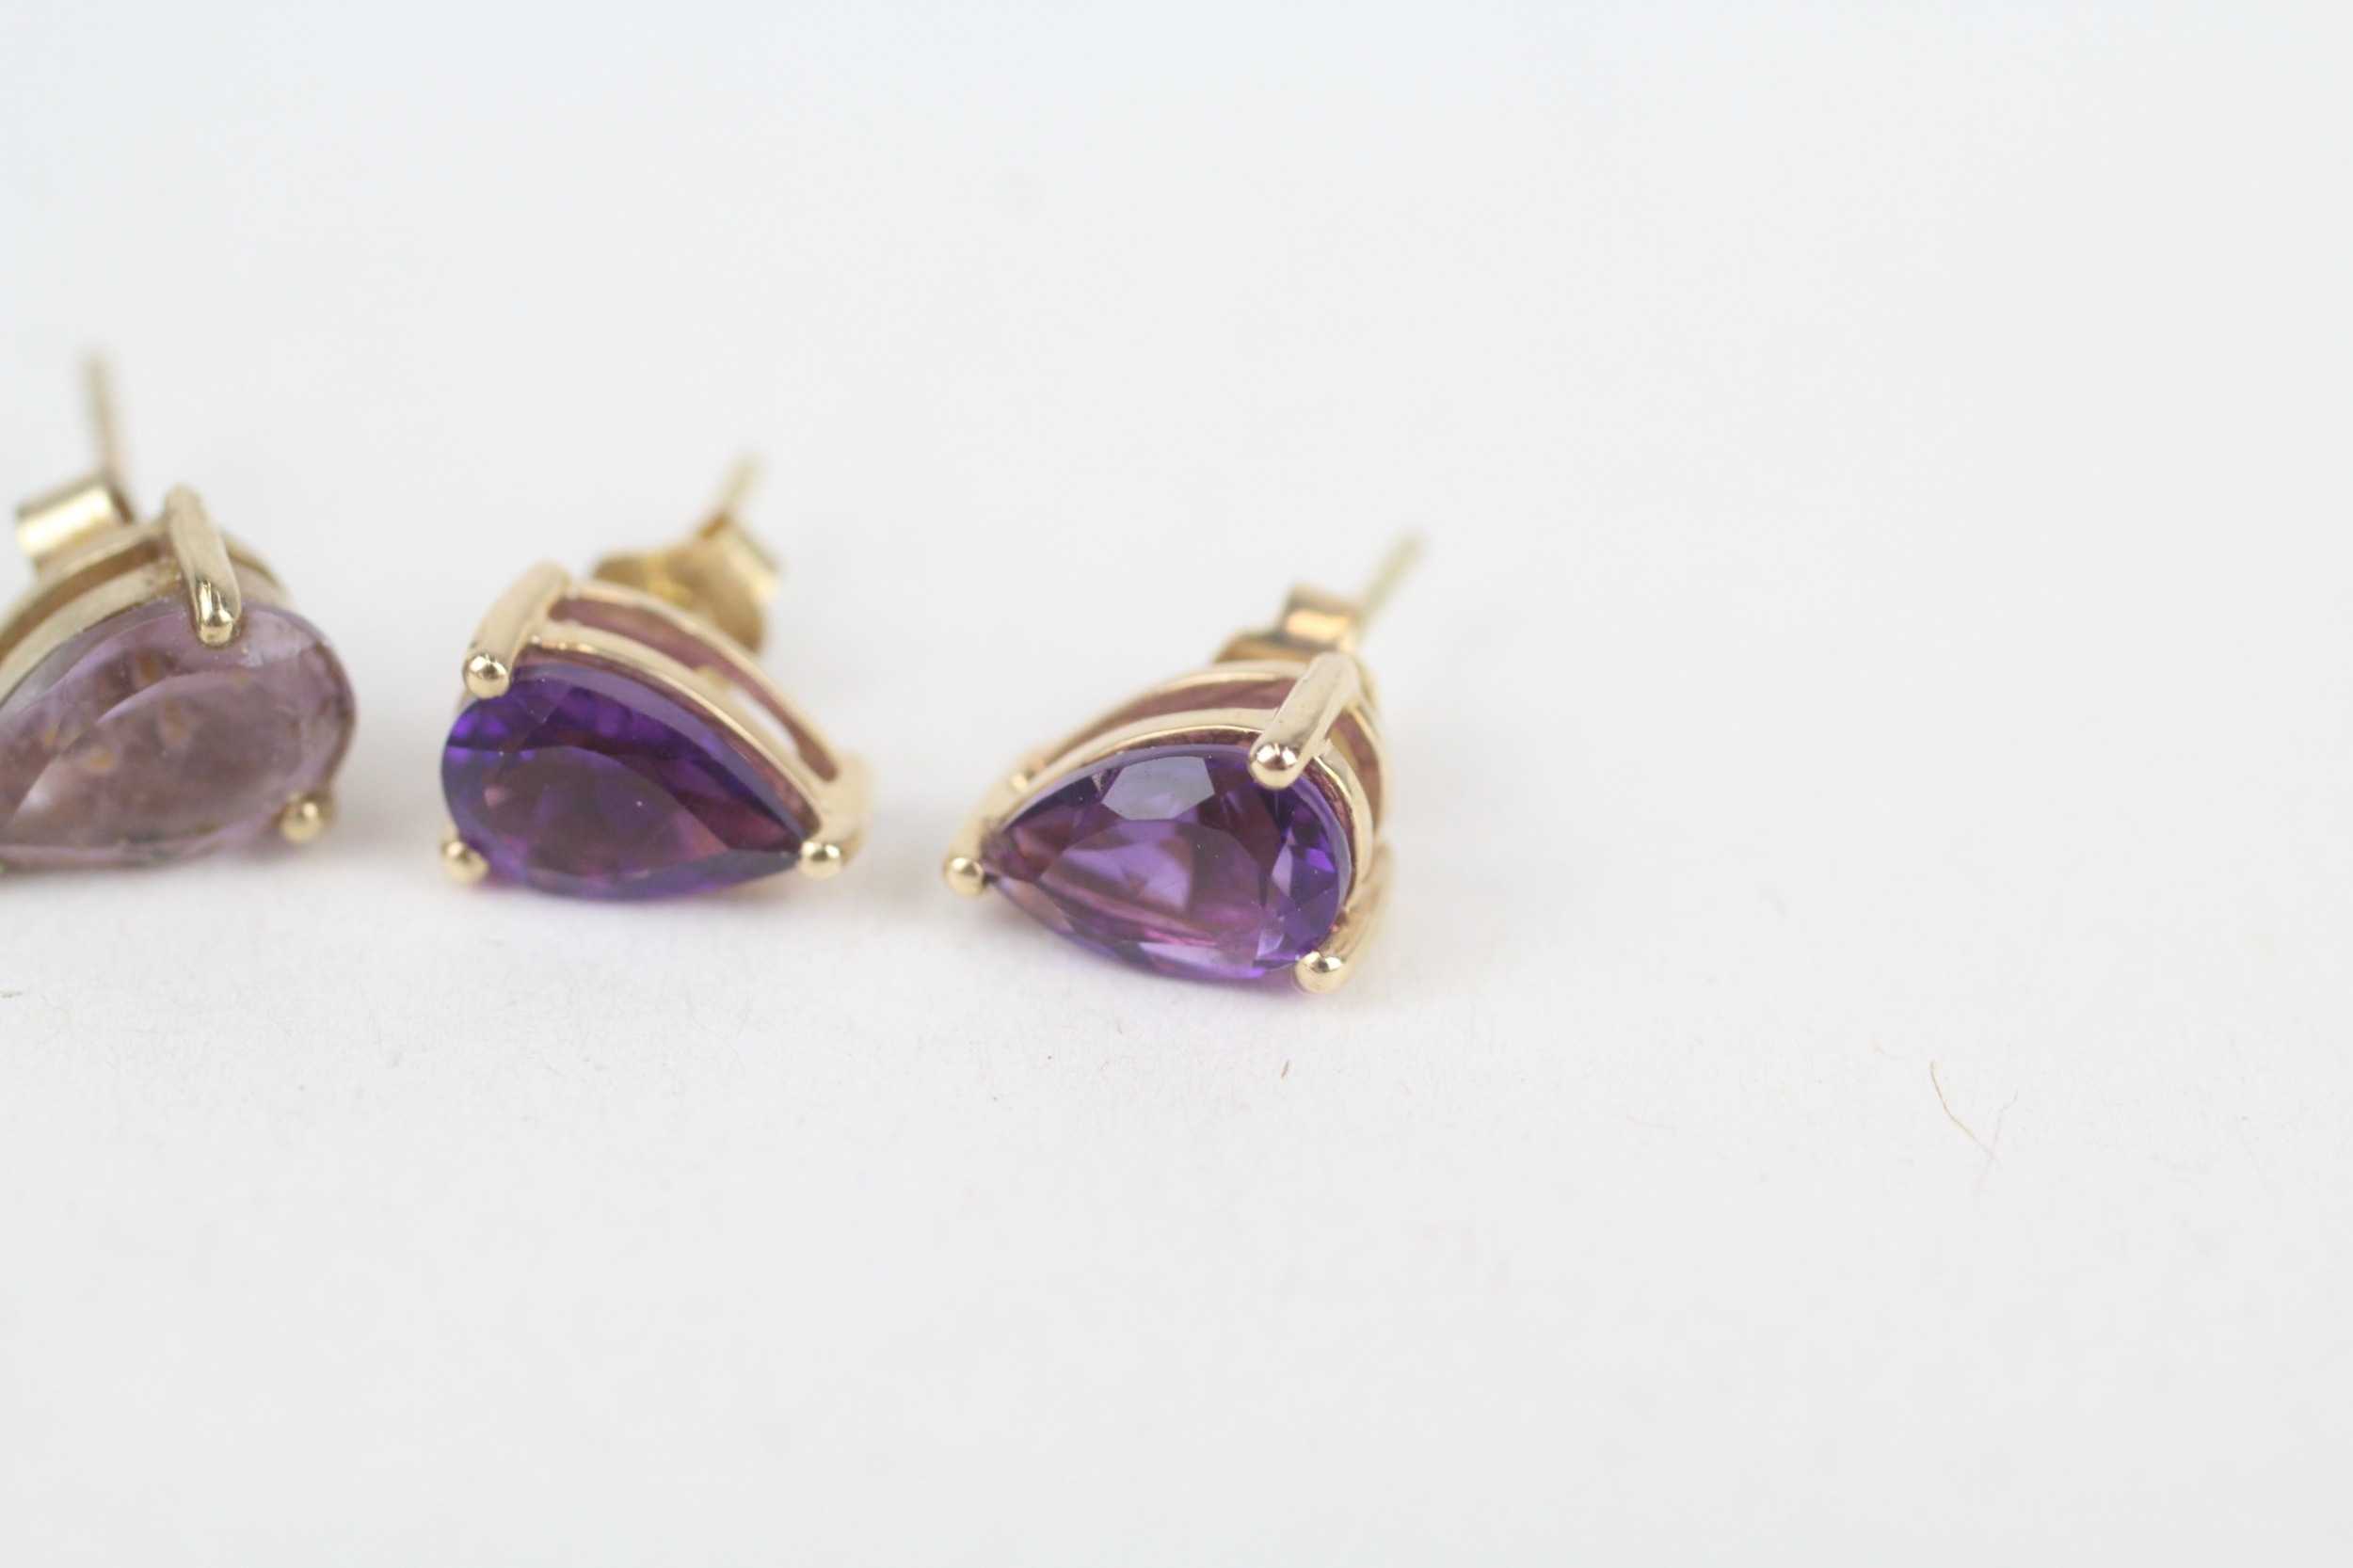 2x 9ct gold pear cut amethyst stud earrings with scroll backs - Image 2 of 4